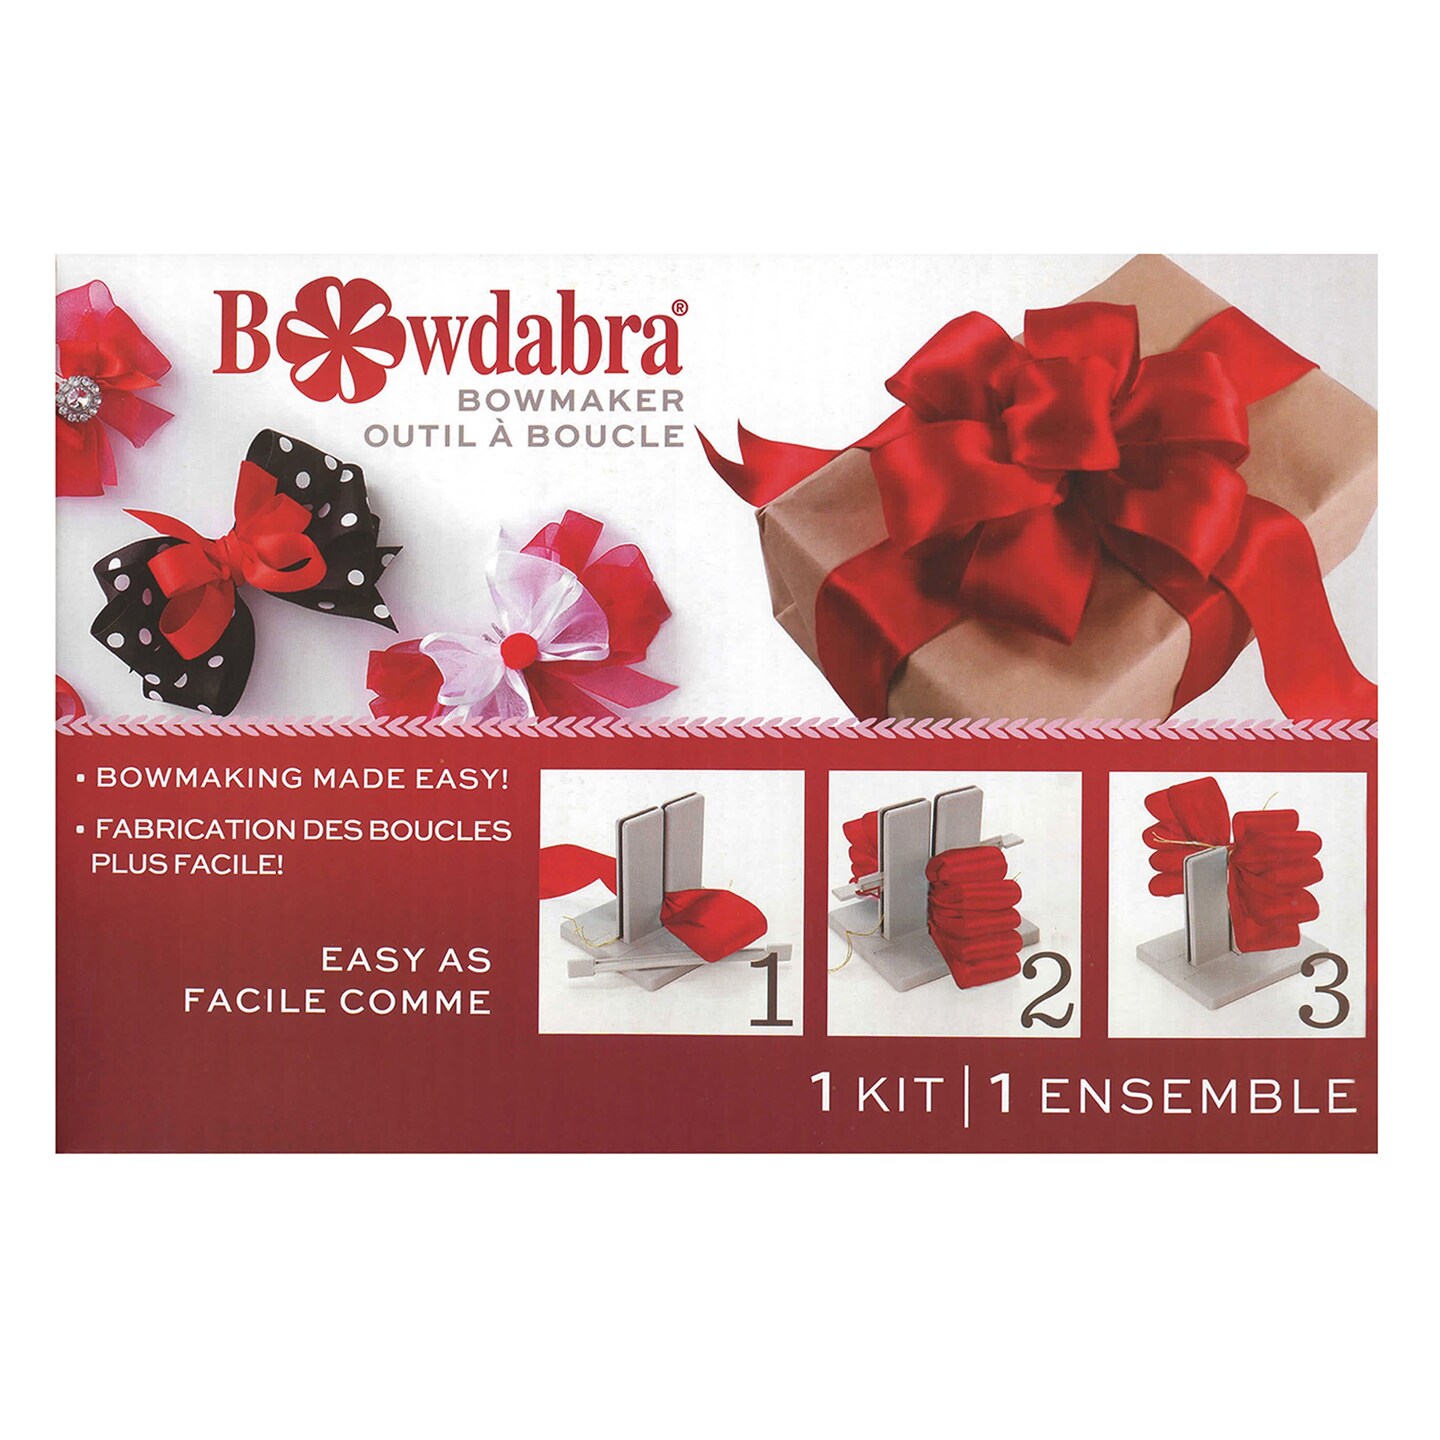 Easy How to Make a Bowdabra Christmas Wreath Bow with wired ribbon